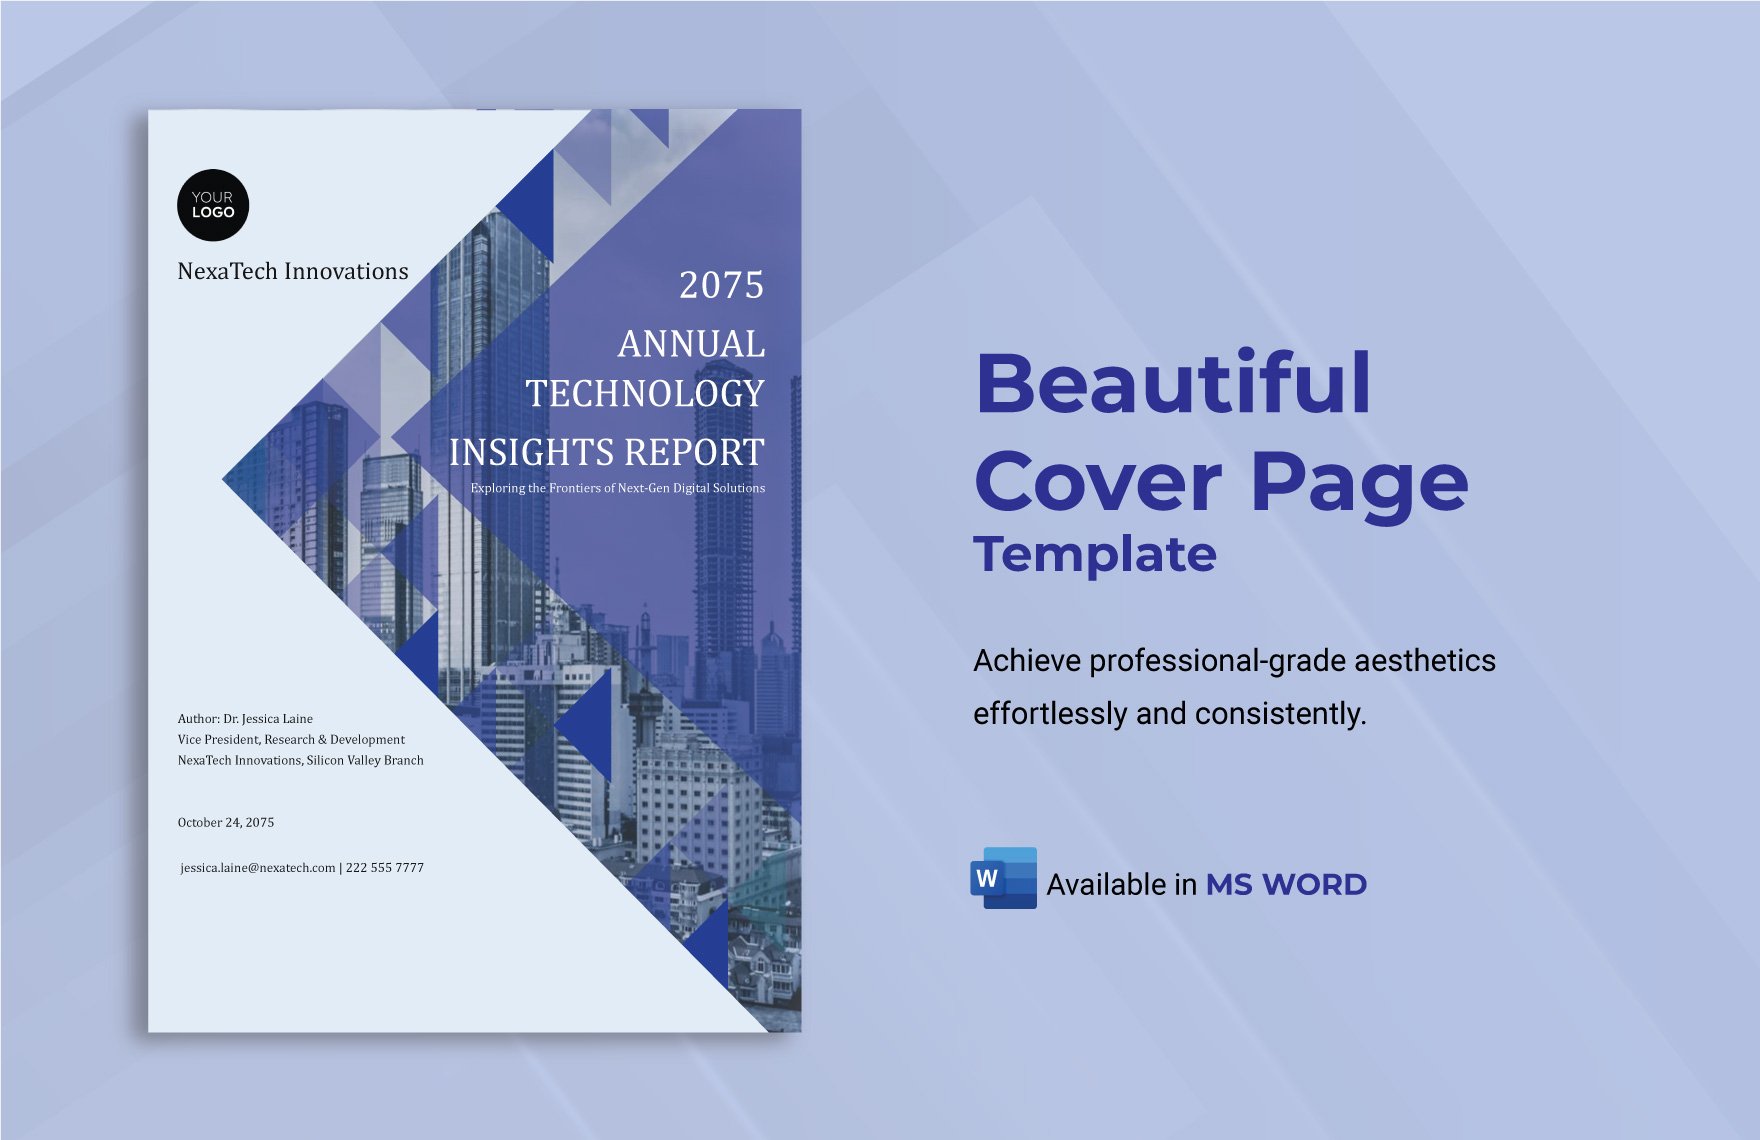 Beautiful Cover Page Template